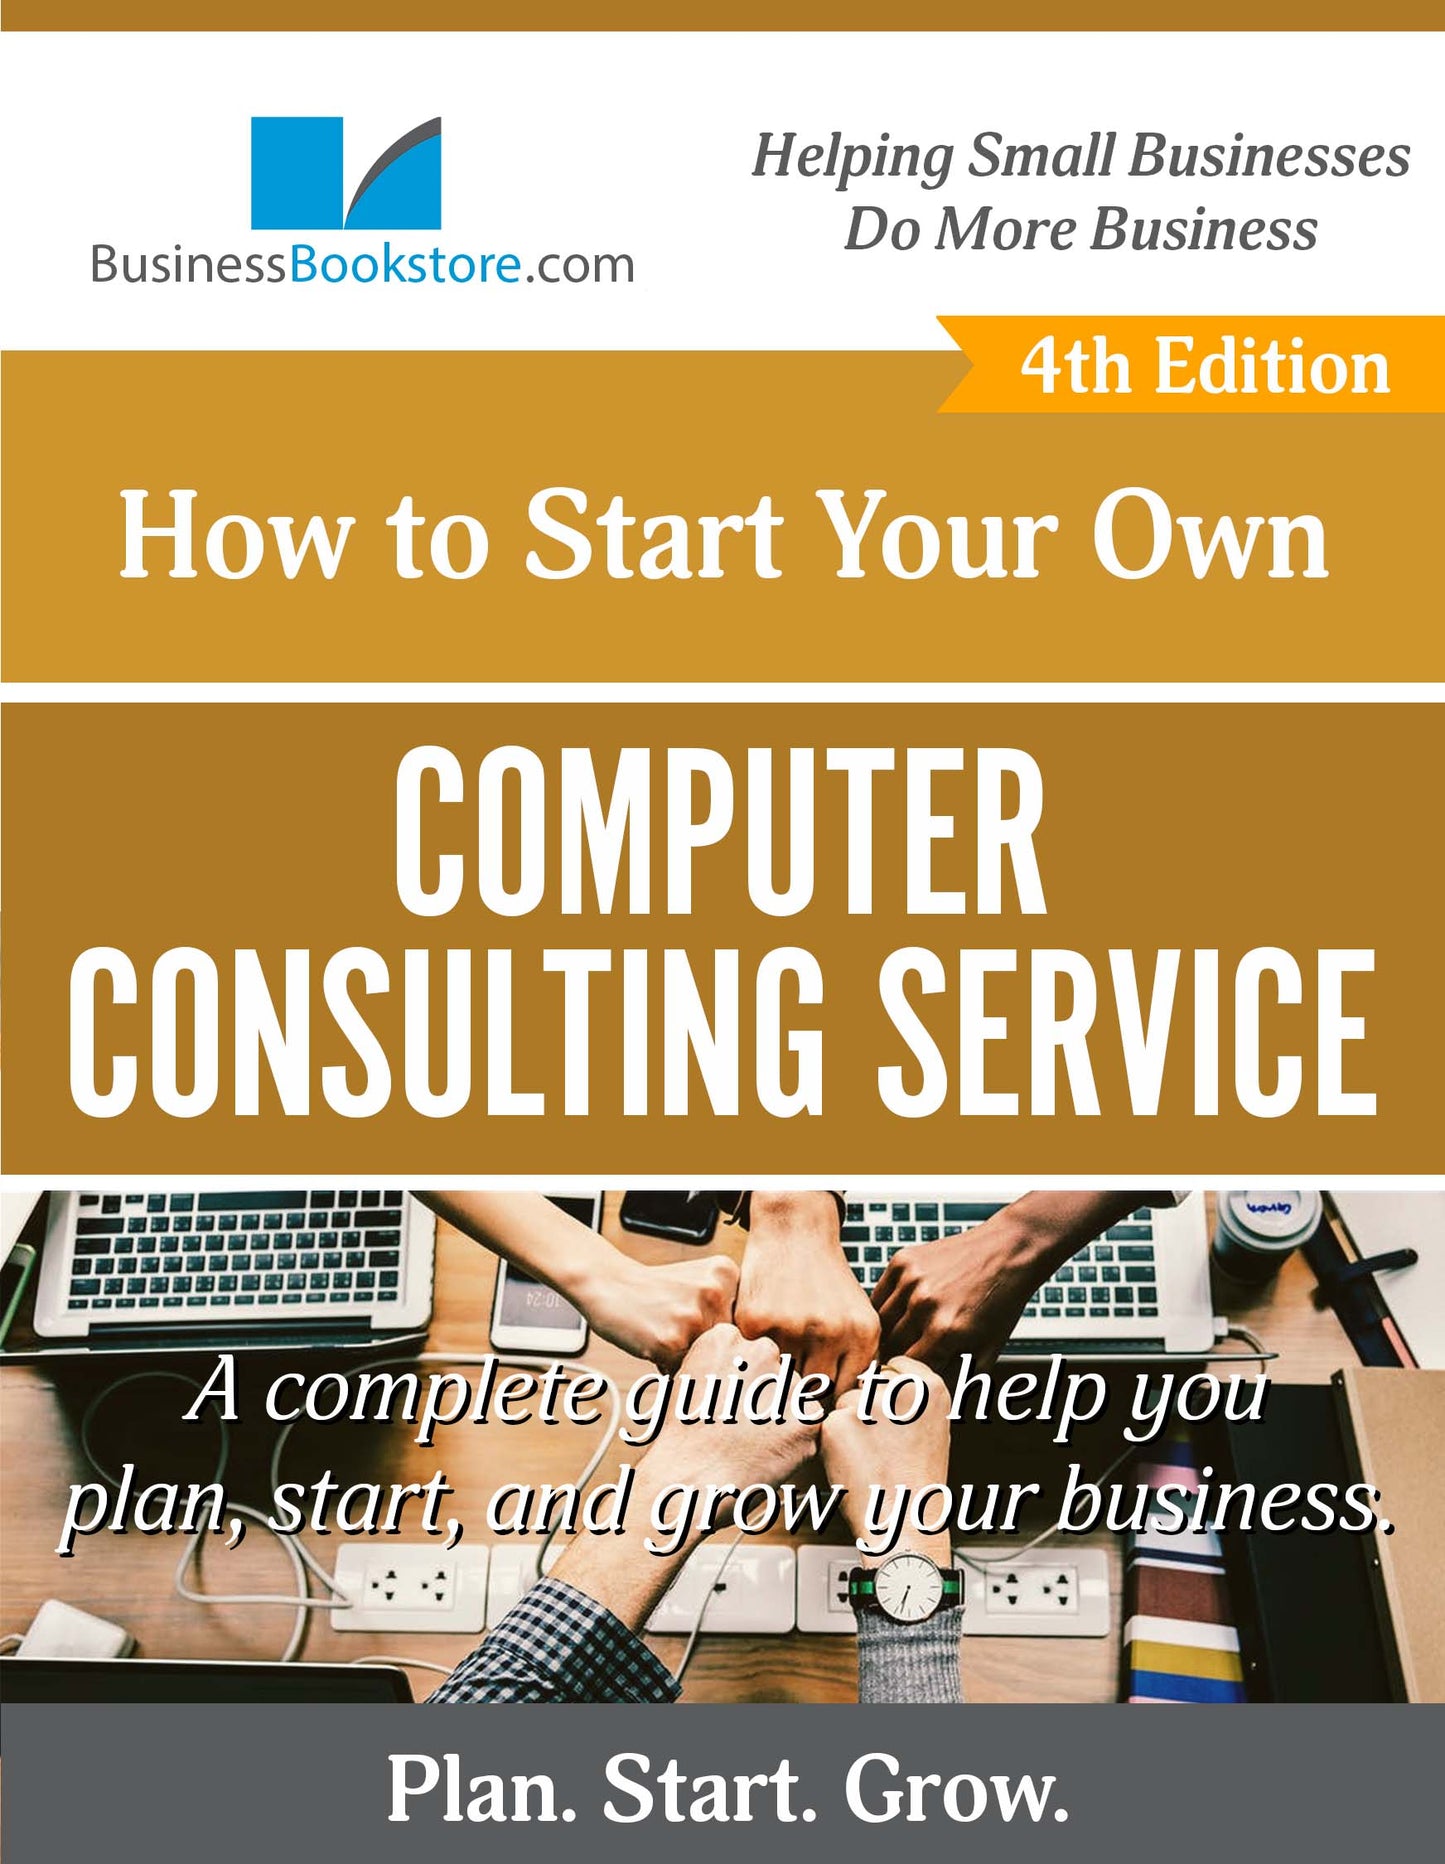 How to Start a Computer Consulting Service